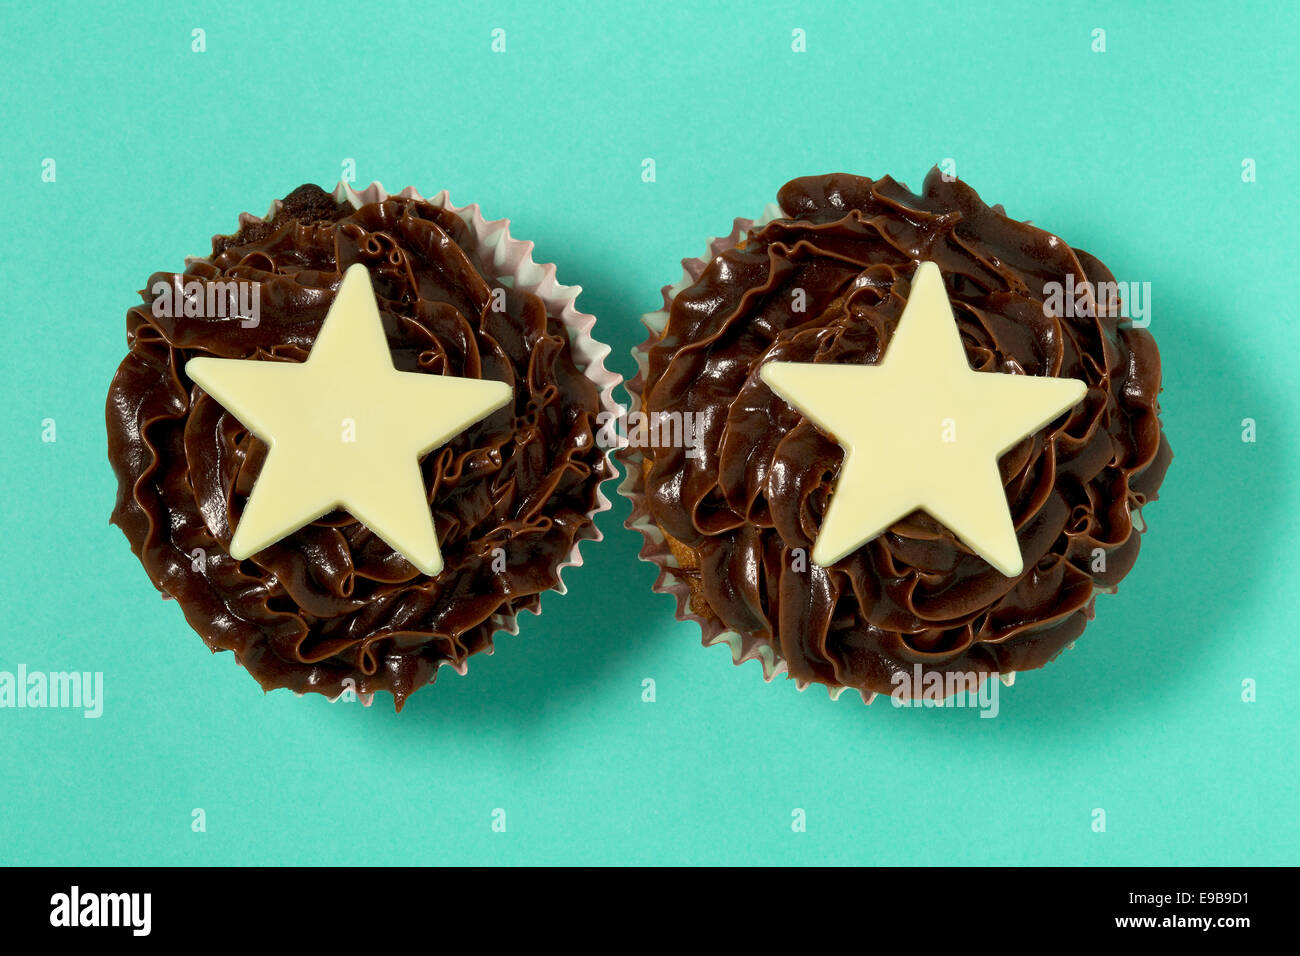 Two chocolate cupcakes with white chocolate stars on a turquoise background Stock Photo